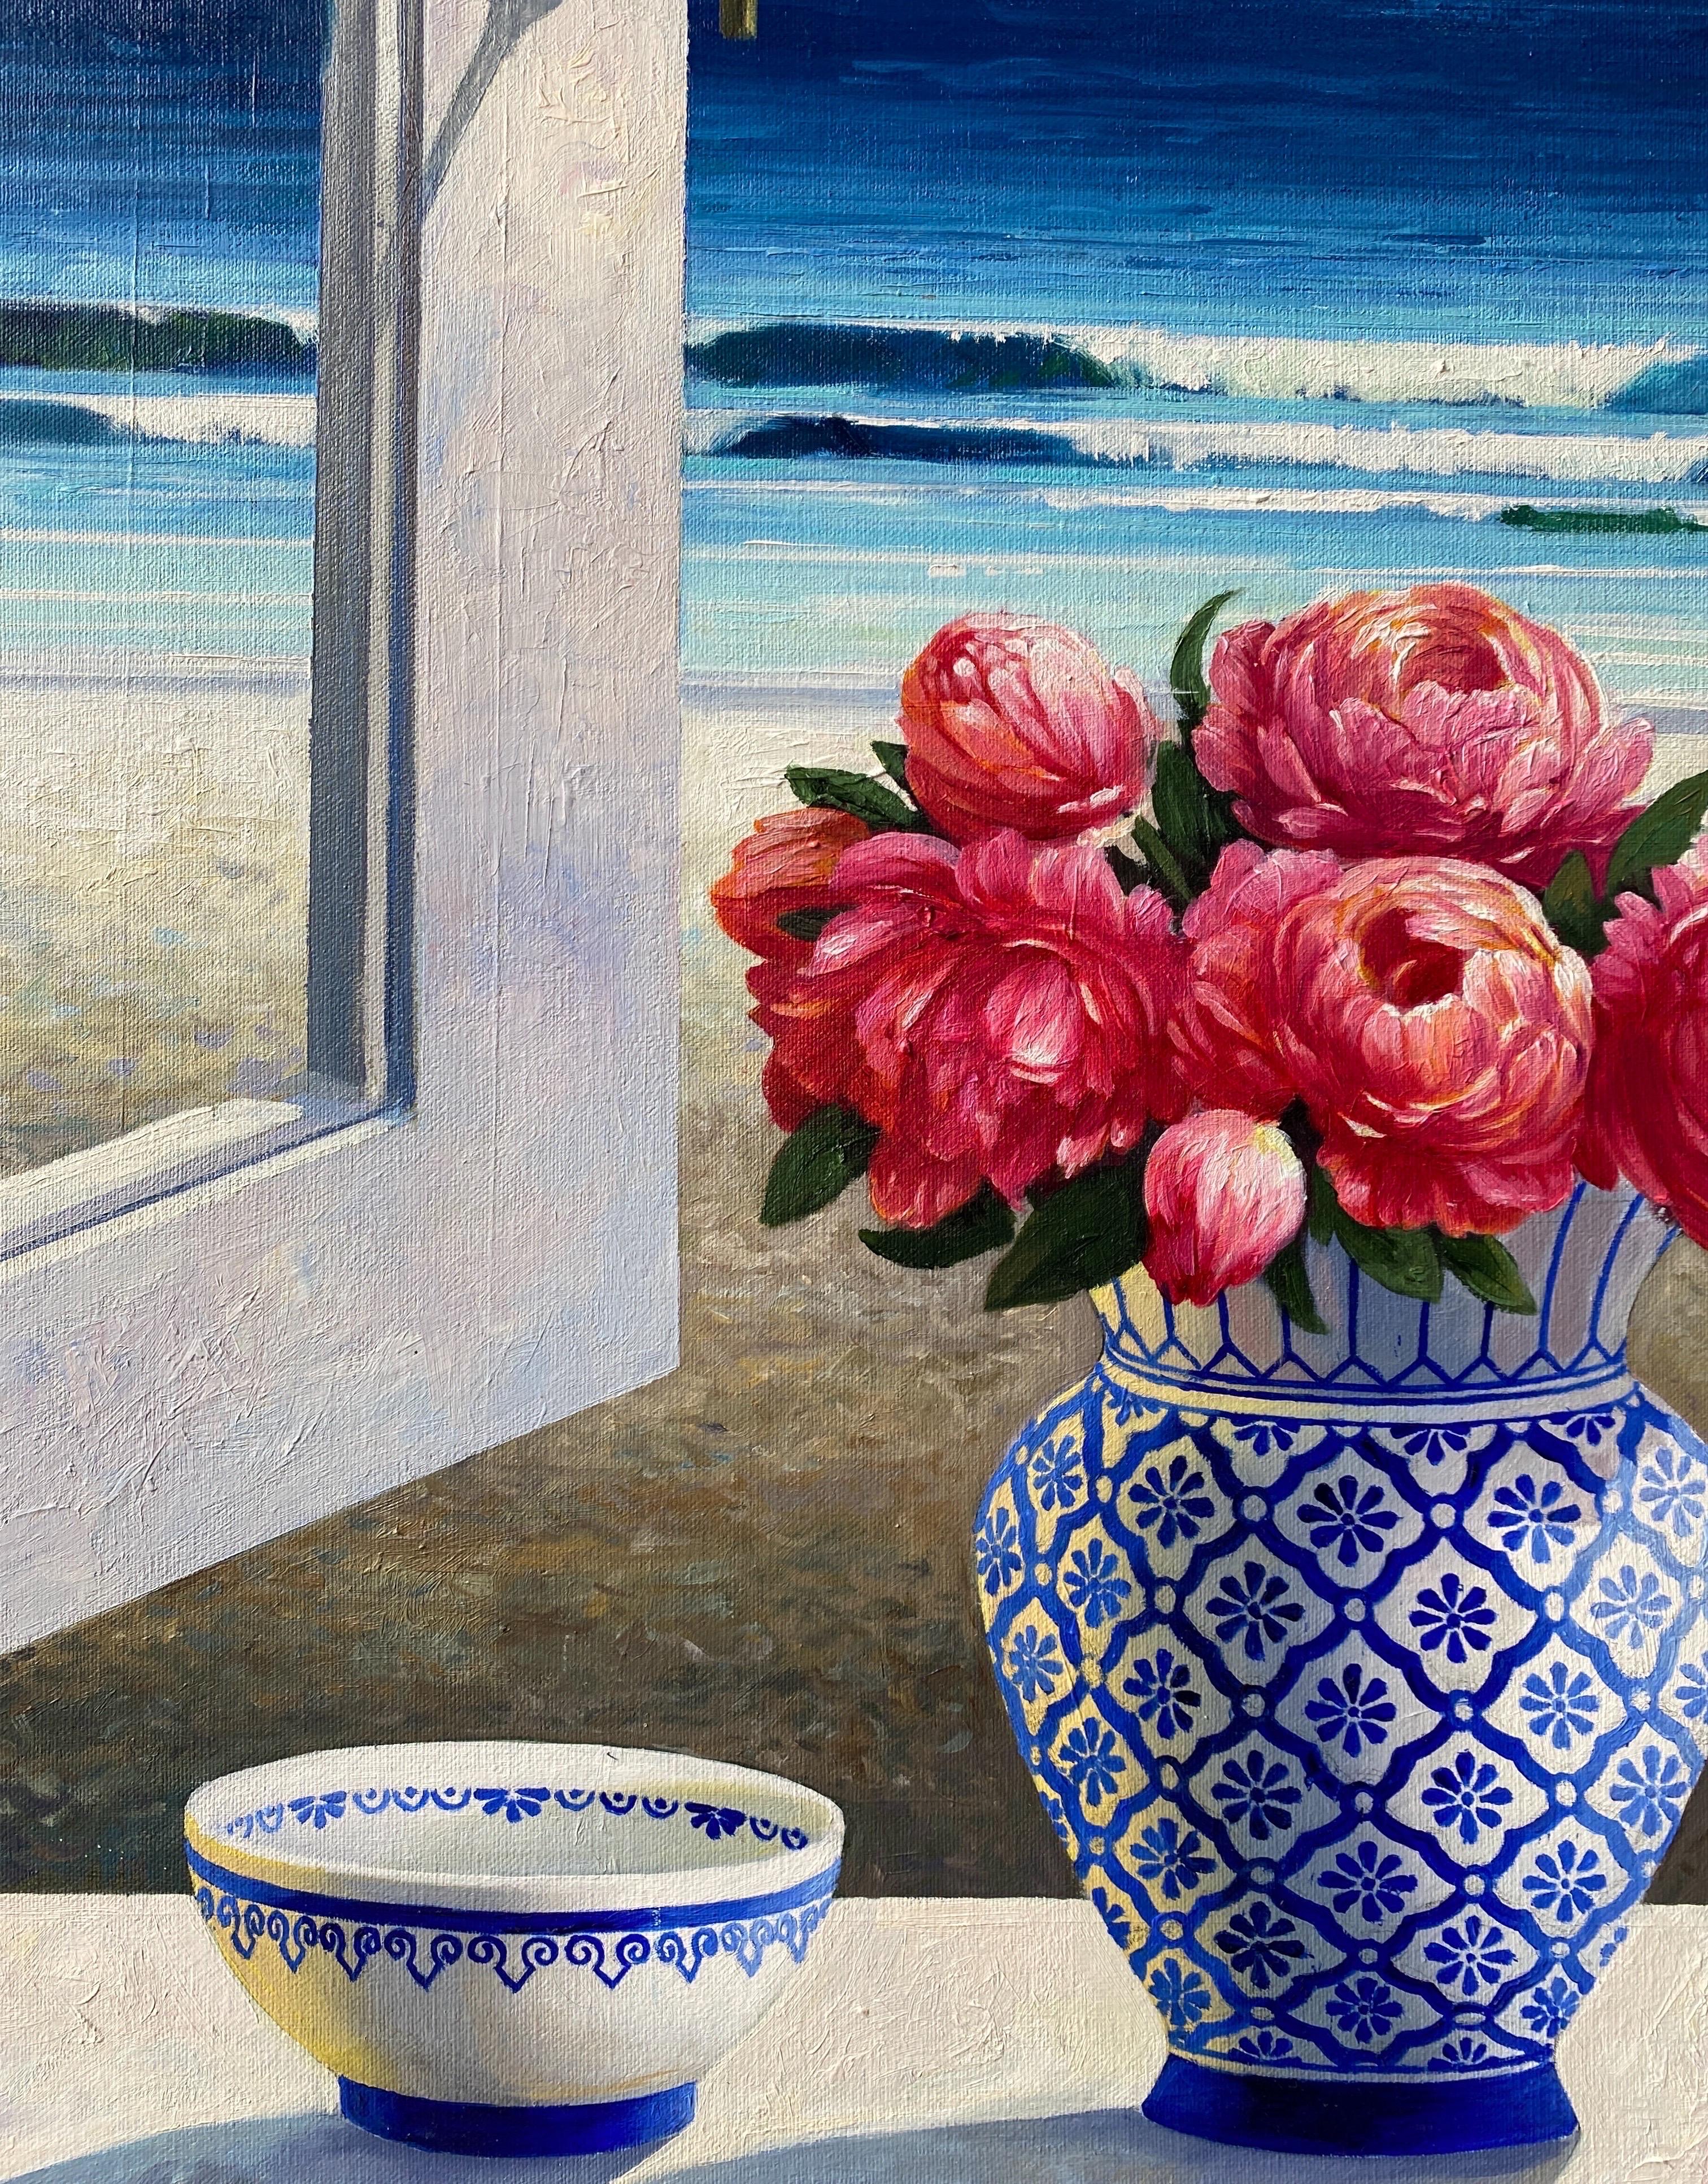 Summer view with peonies - Original oil painting - Contemporary art - Painting by Luis Fuentes